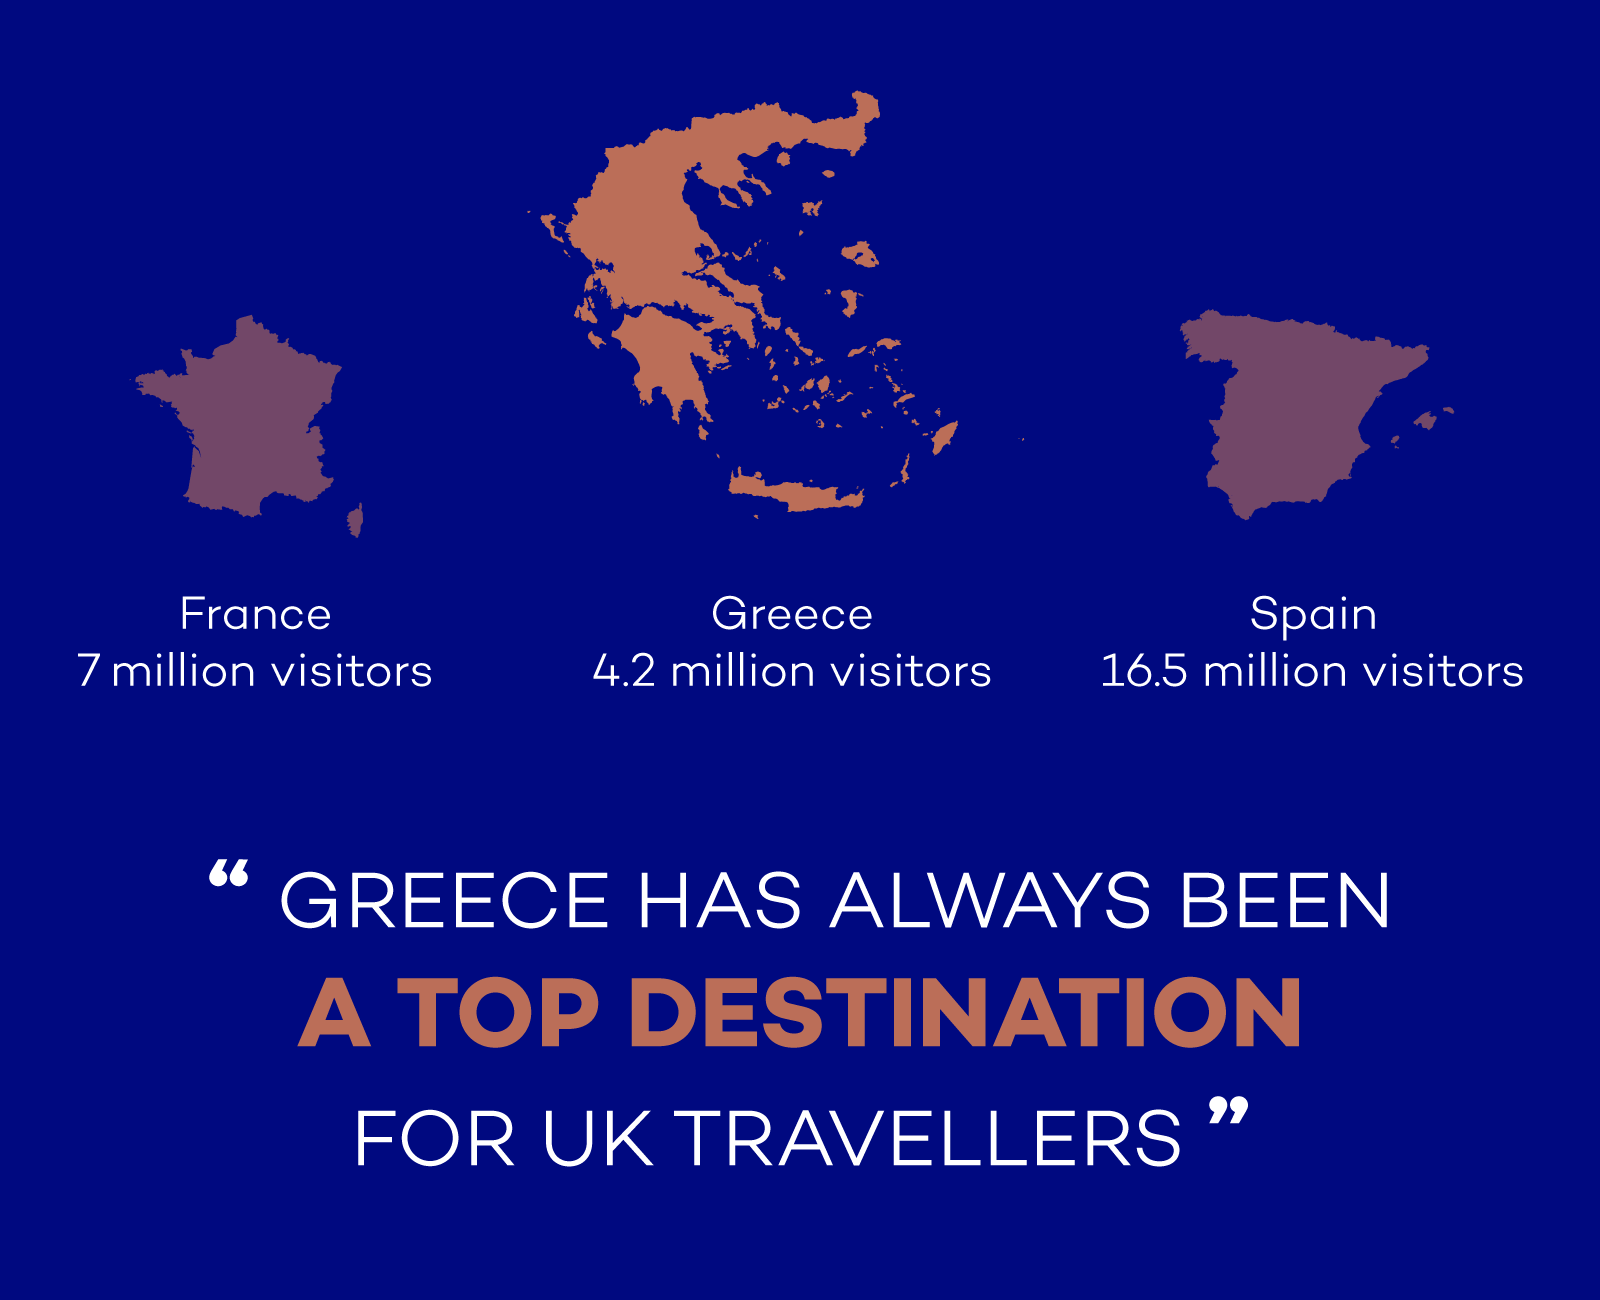 Greece has always been a top destination for UK travellers